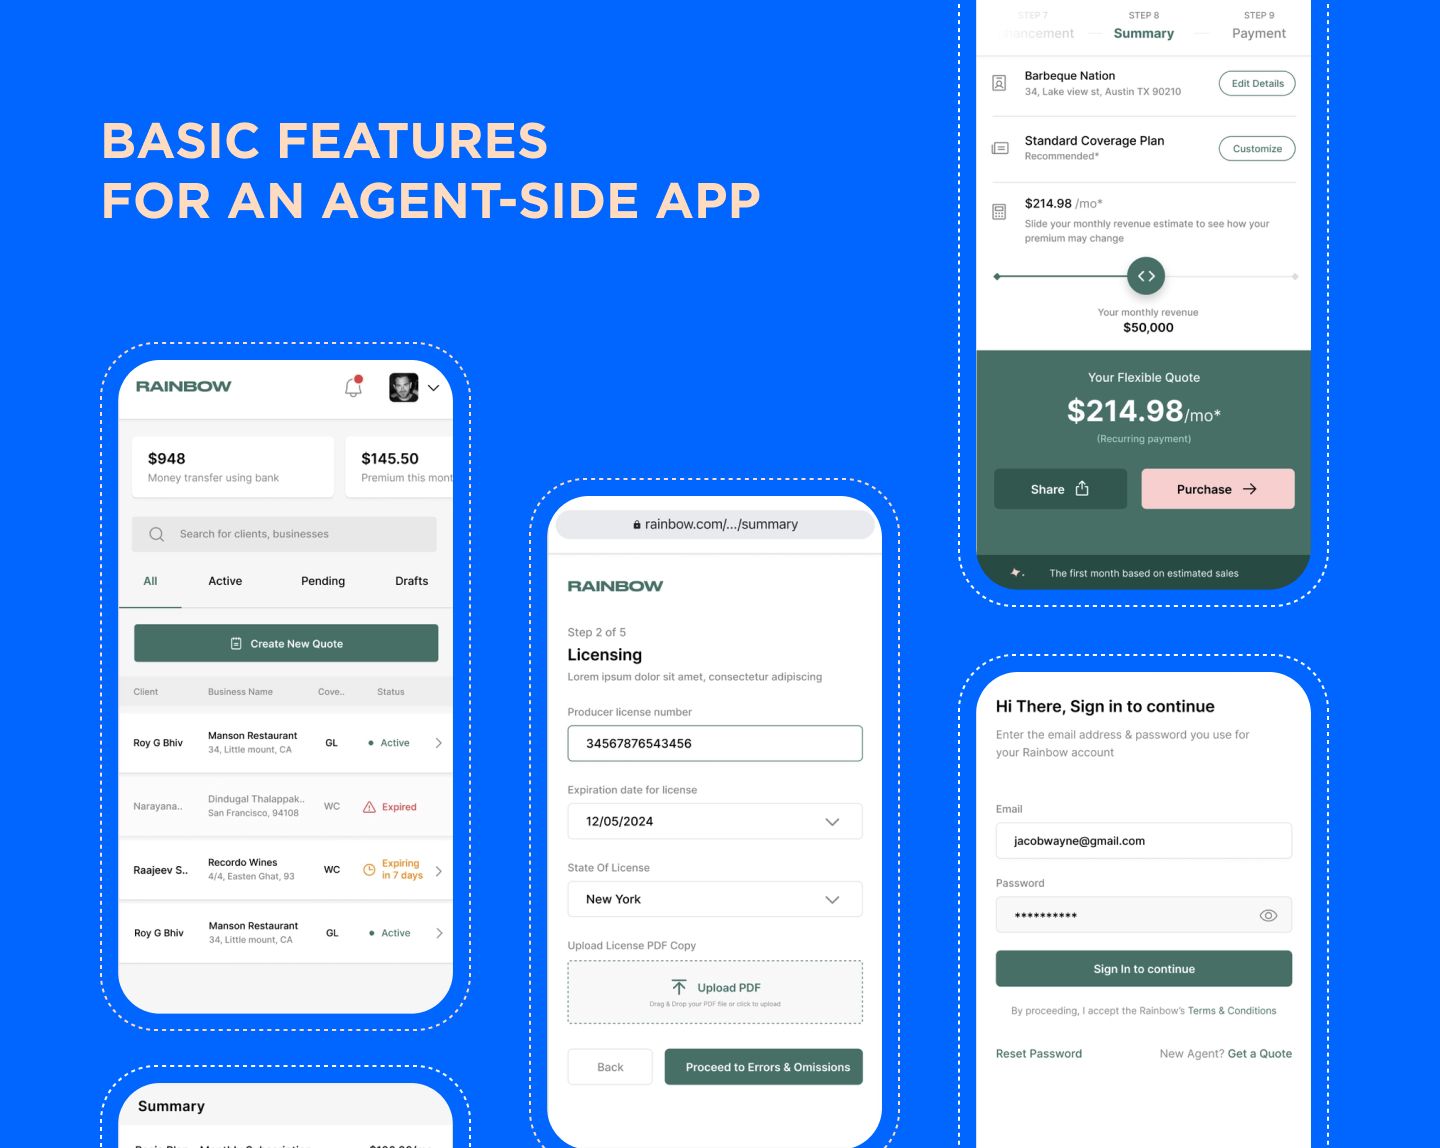 Basic features for an agent-side app